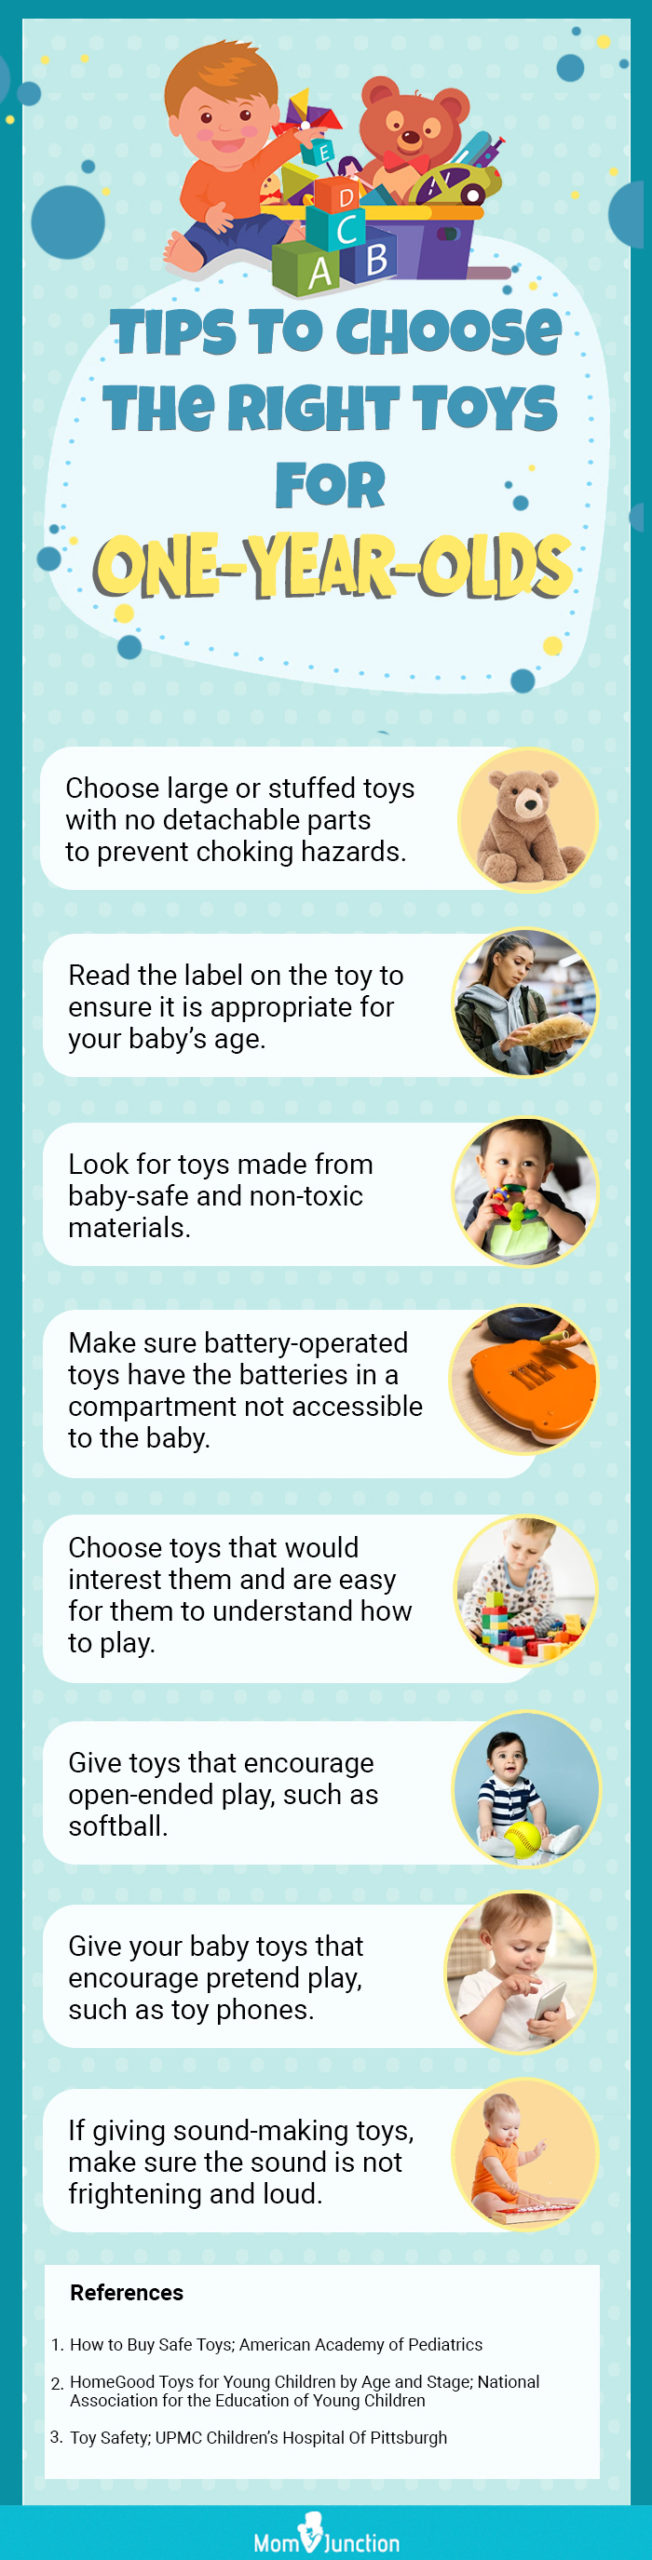 Tips To Choose The Right Toys For One Year Olds (infographic)